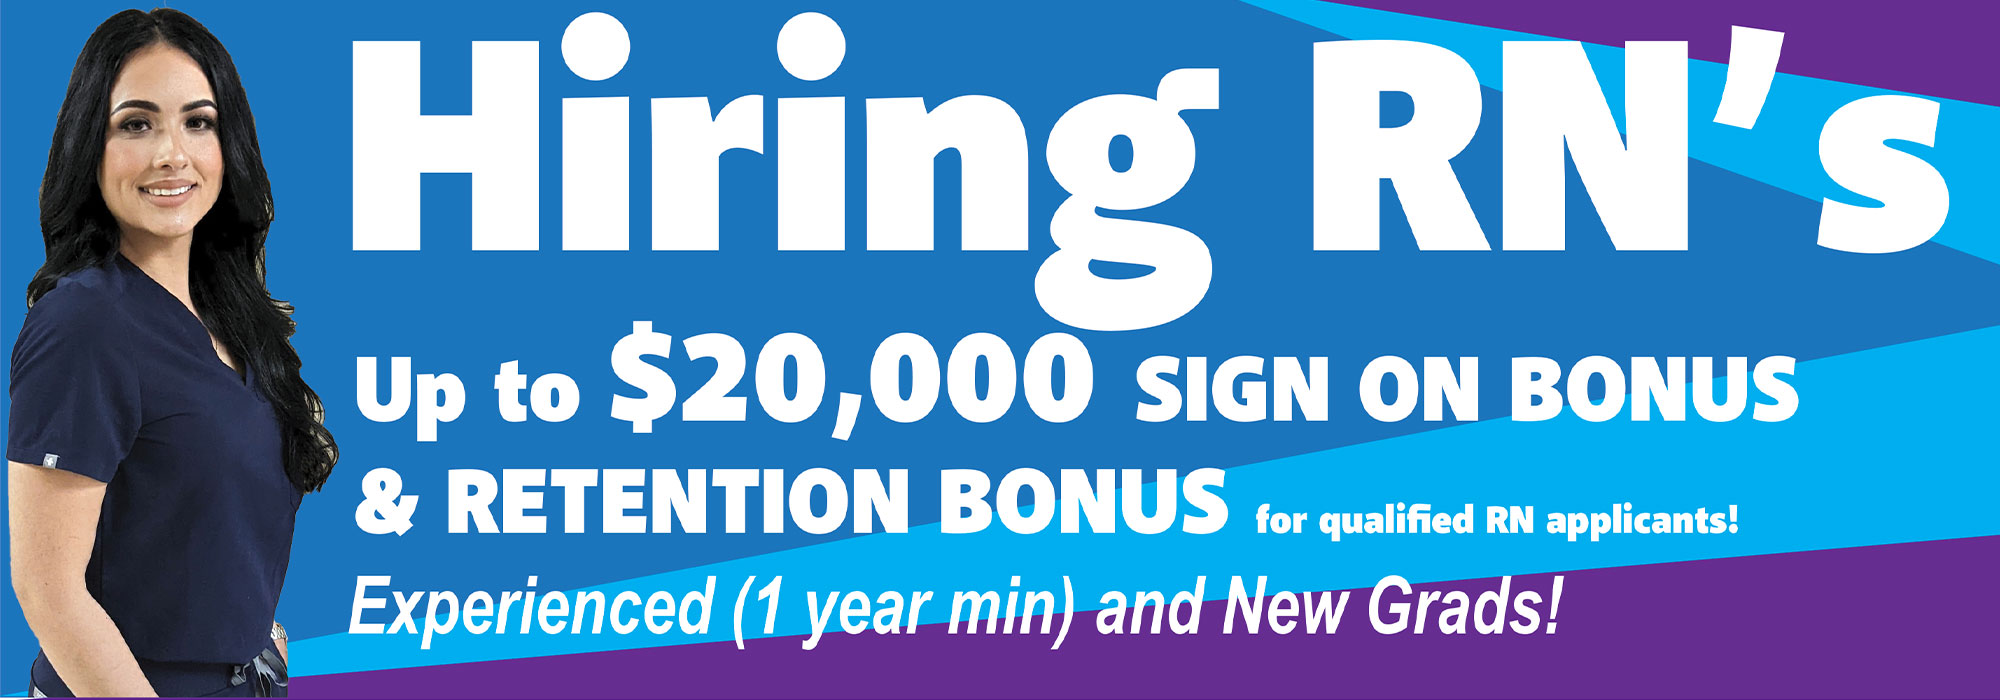 Banner Picture of a smiling female Nurse. Banner says:

Hiring RN's
Up to $20,000 SIGN ON BONUS
& RETENTION BONUS for qualified RN applicants!
Experienced (1 year min) and New Grads!